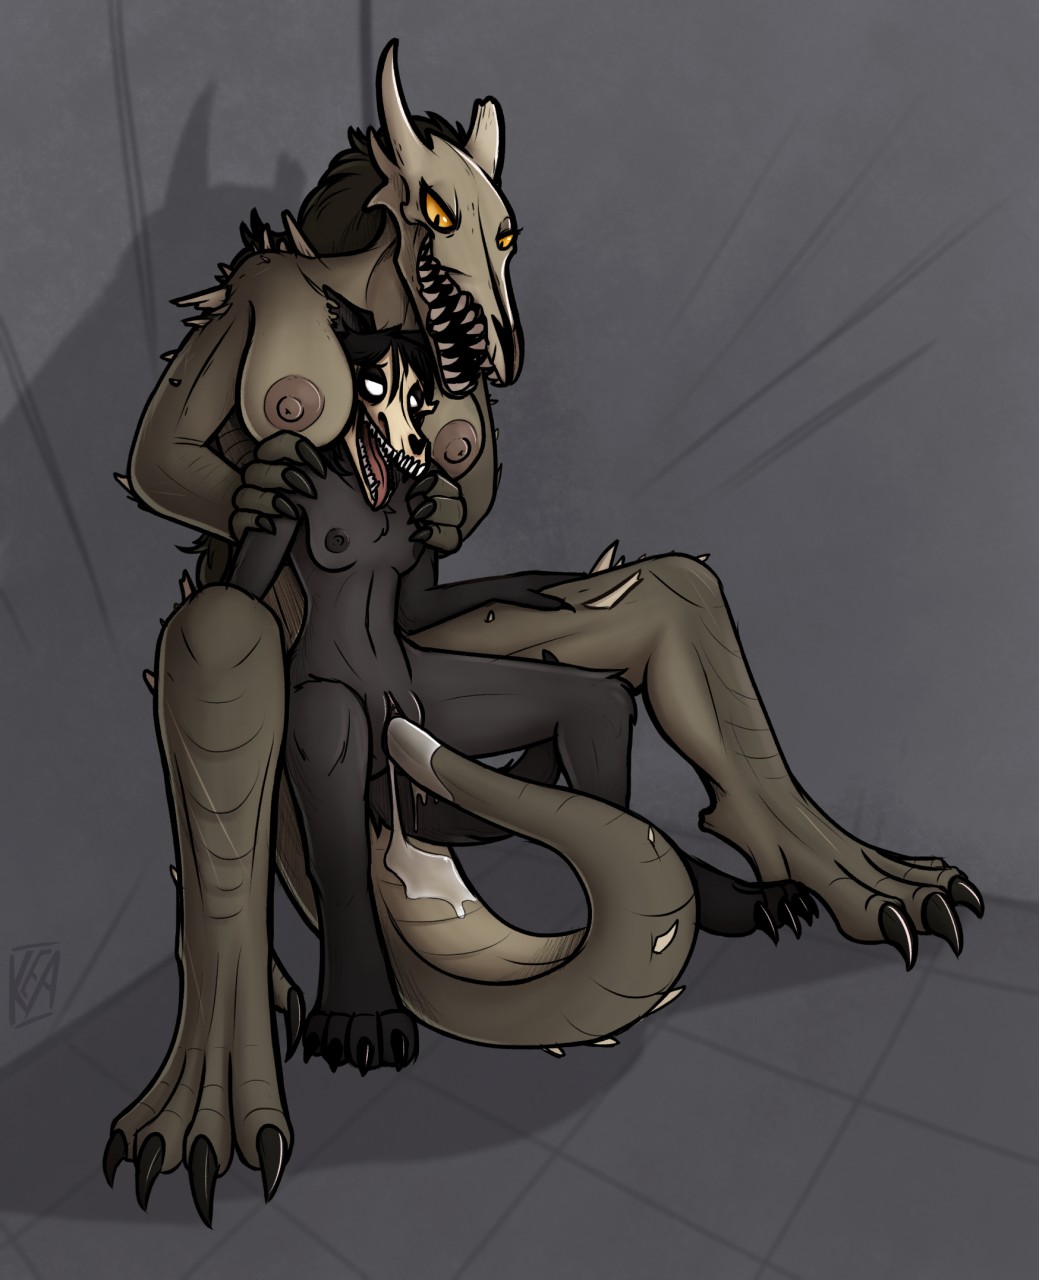 34. "all of you...Disgusting..."A different version of SCP-682 Un...